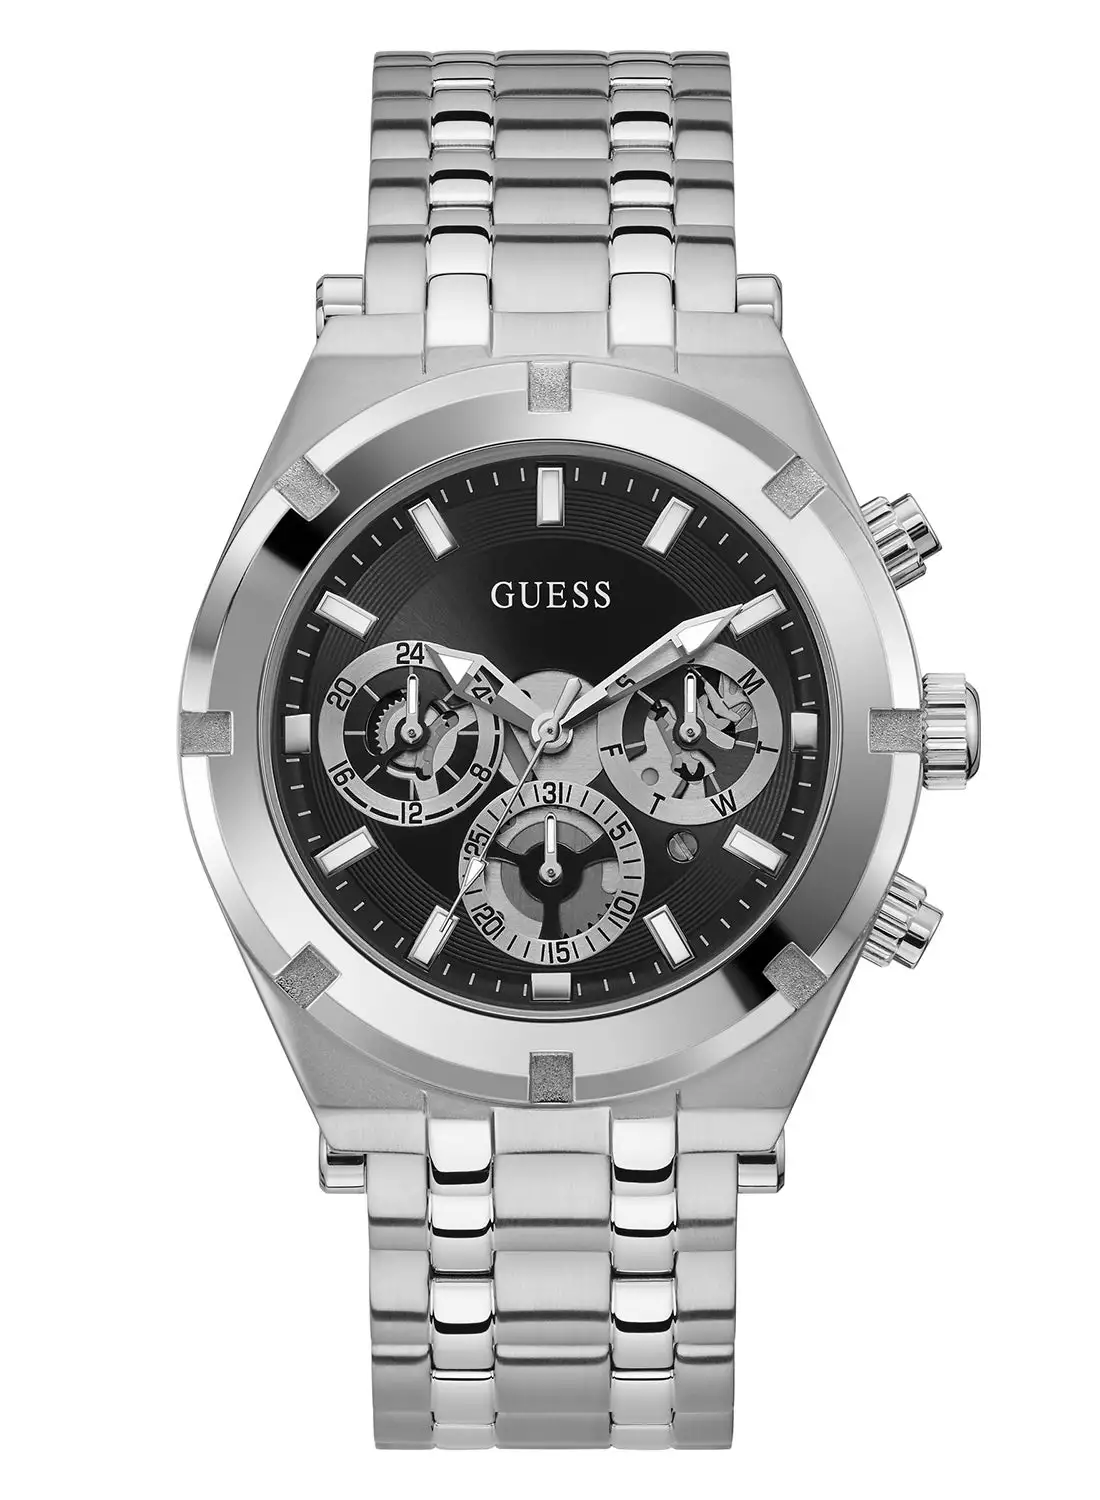 GUESS Men's Analog Round Shape Stainless Steel Wrist Watch GW0260G1 - 44 Mm